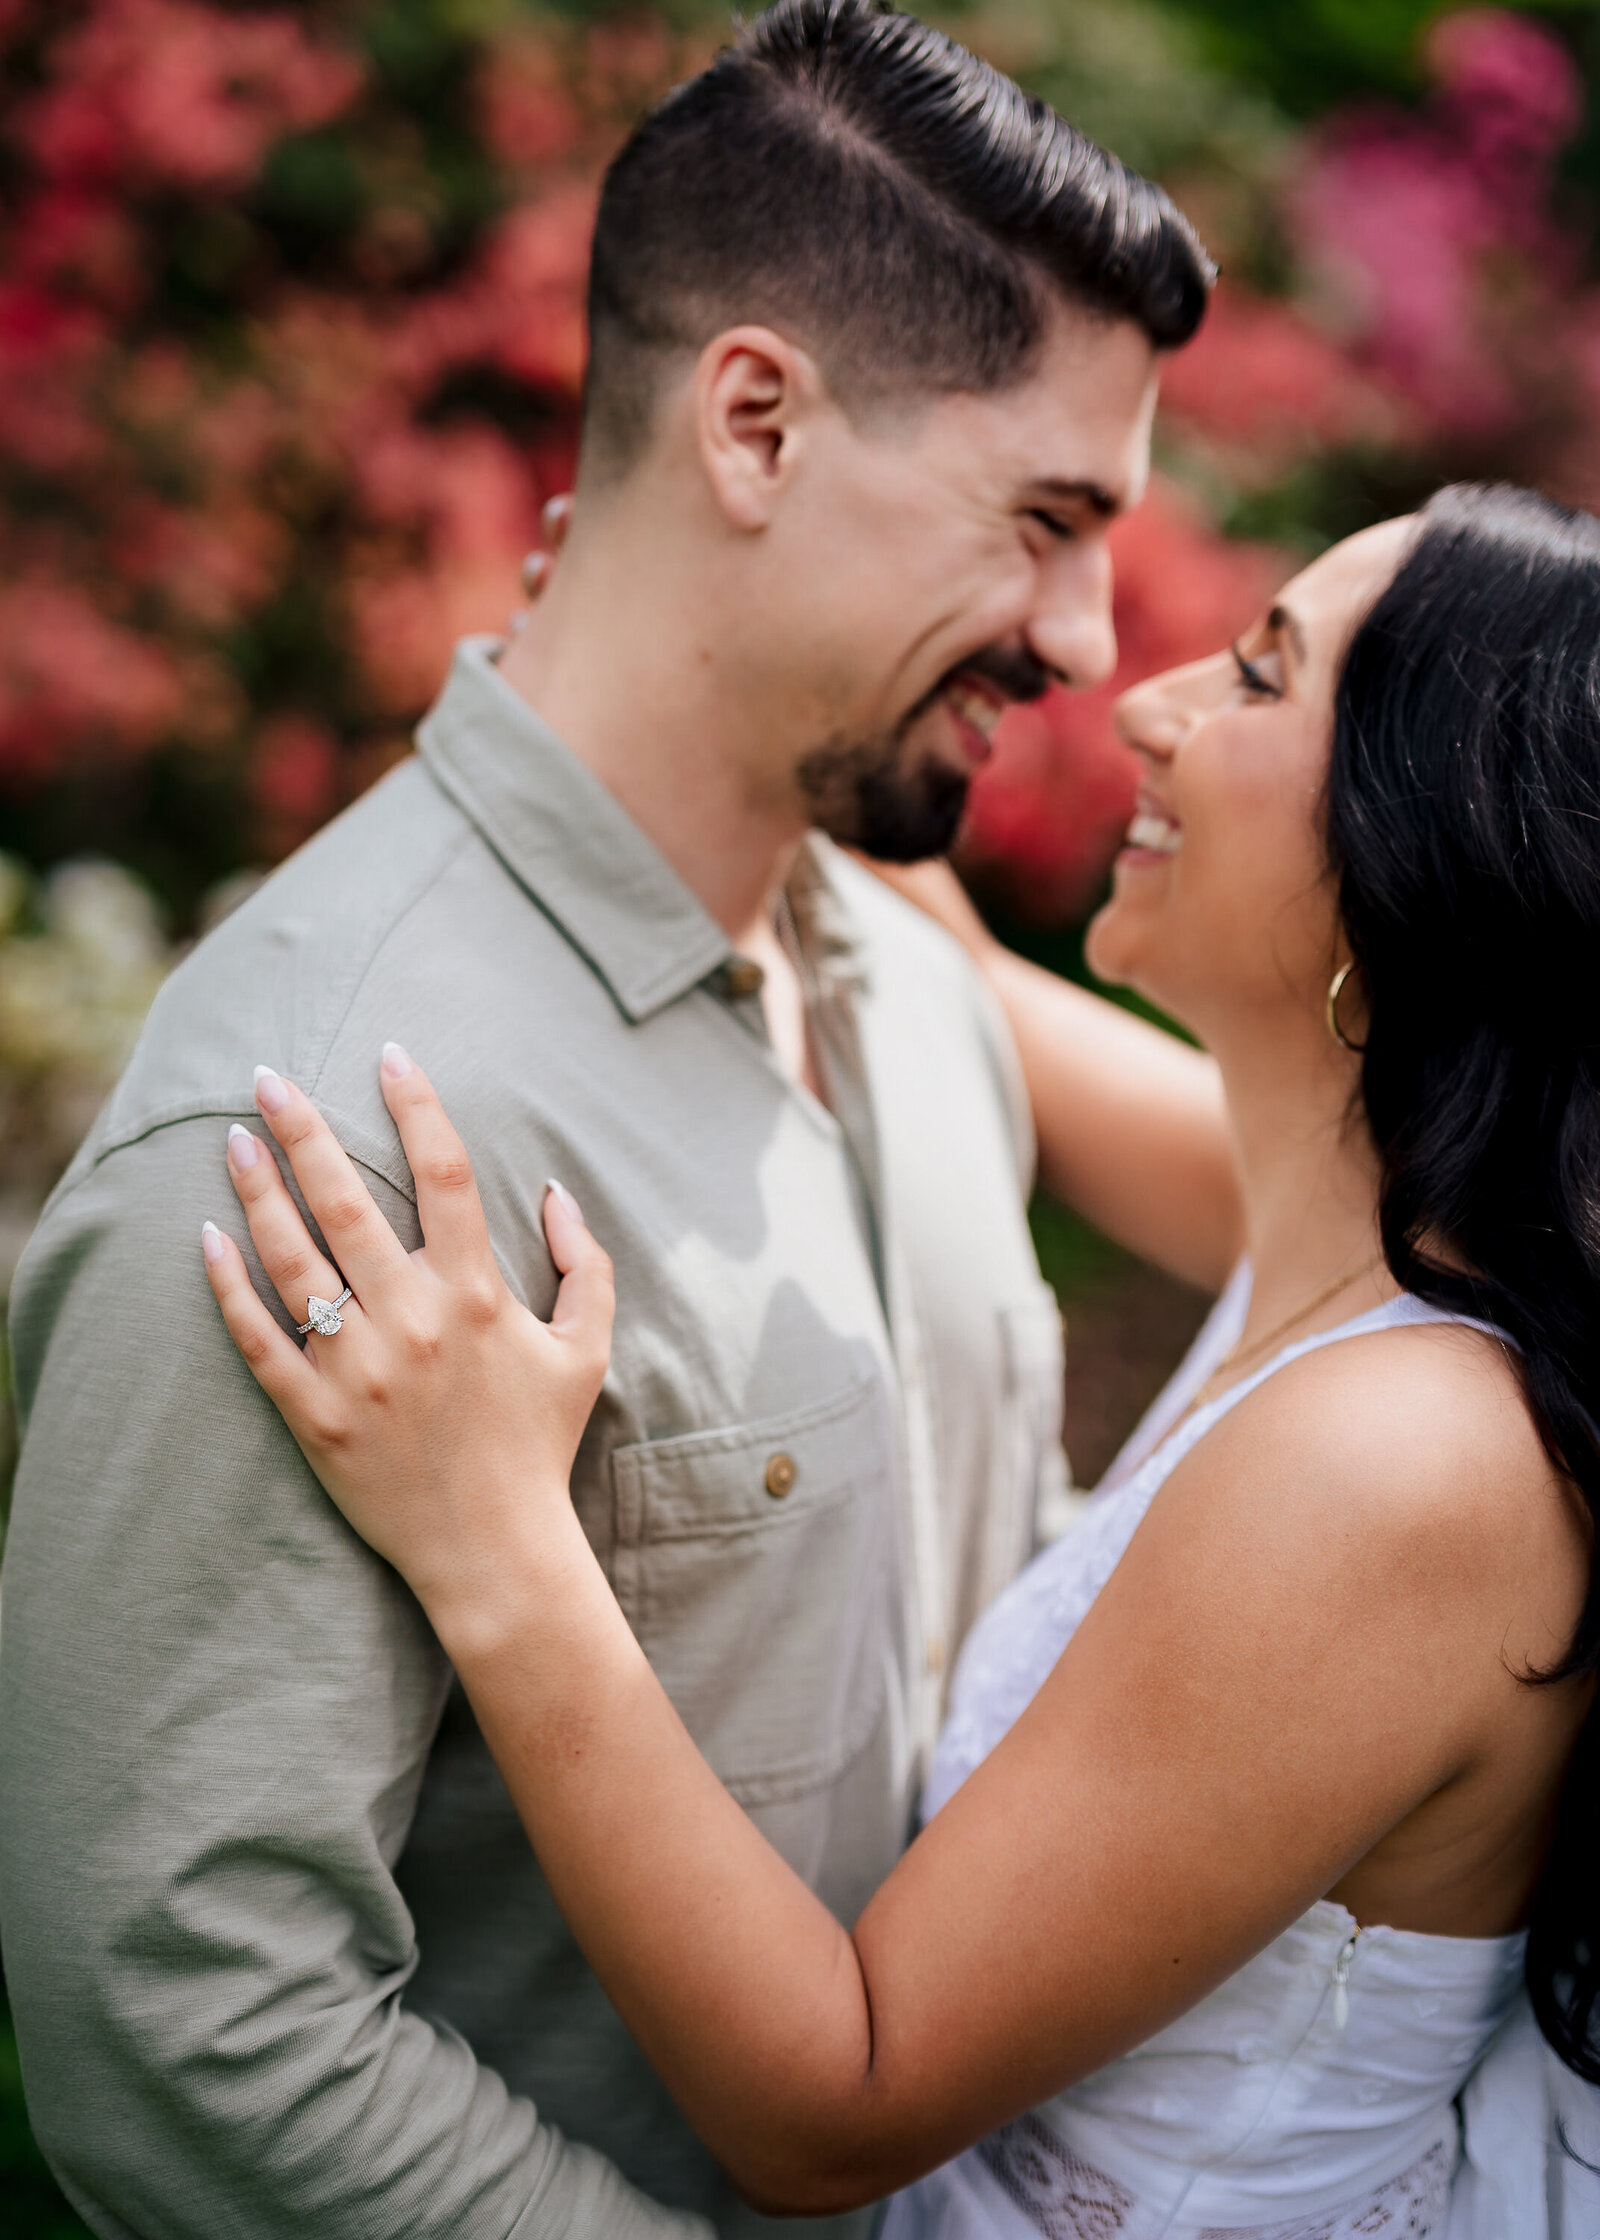 Ishan Fotografi is your Longwood Gardens engagement photo specialist.